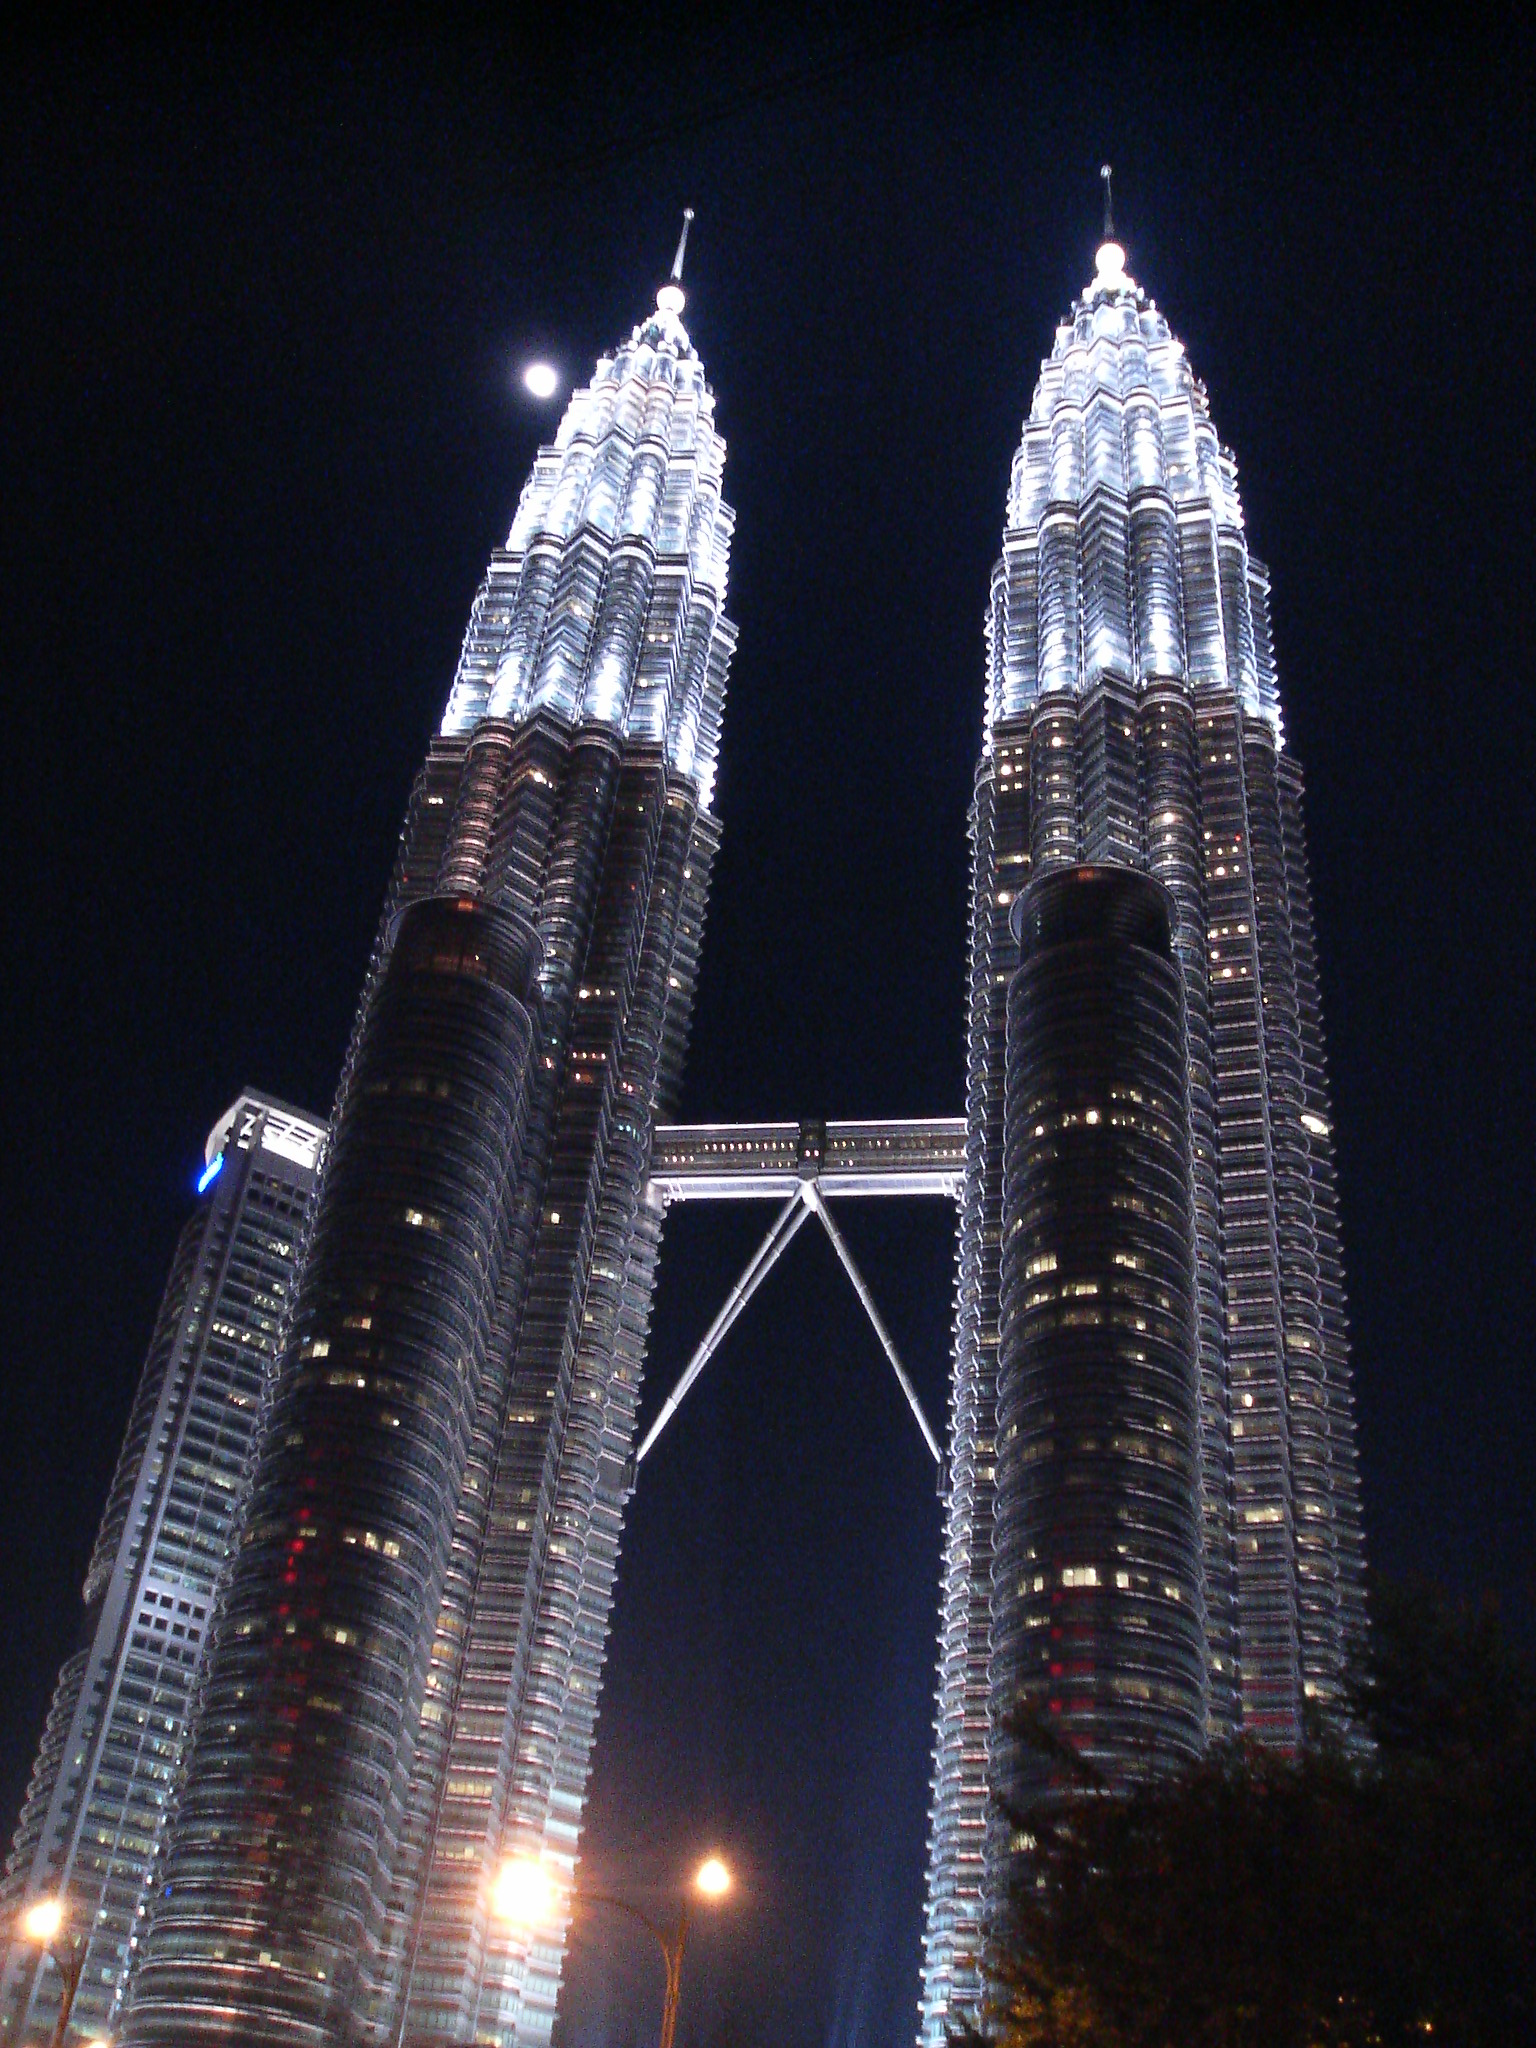 two large skyscrs that are lit up at night